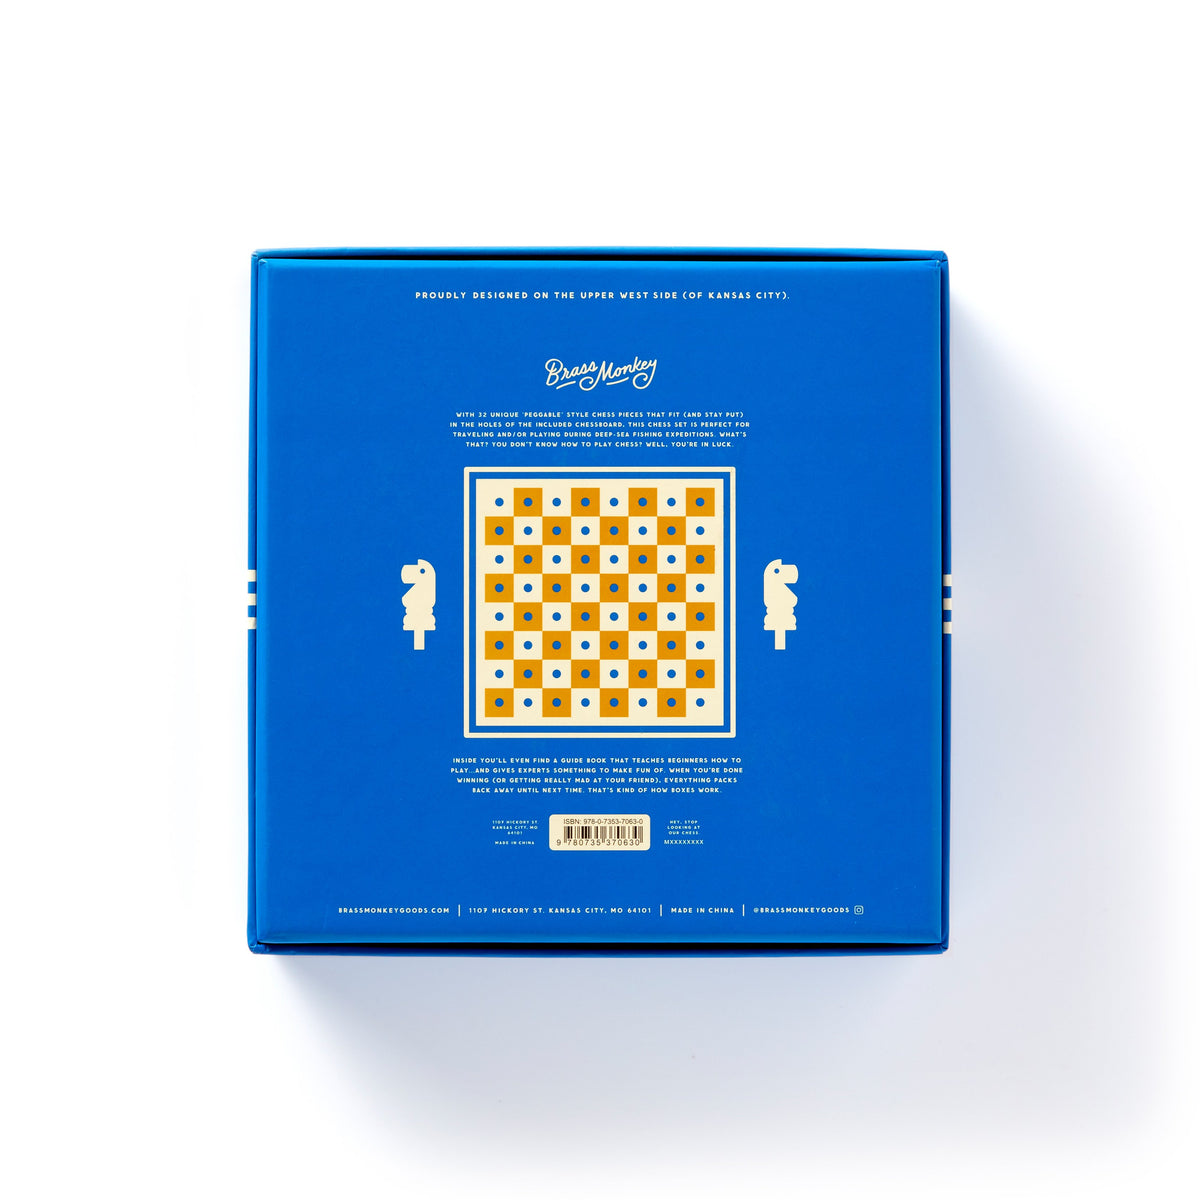 Say Yes To The Chess Game Set Galison 